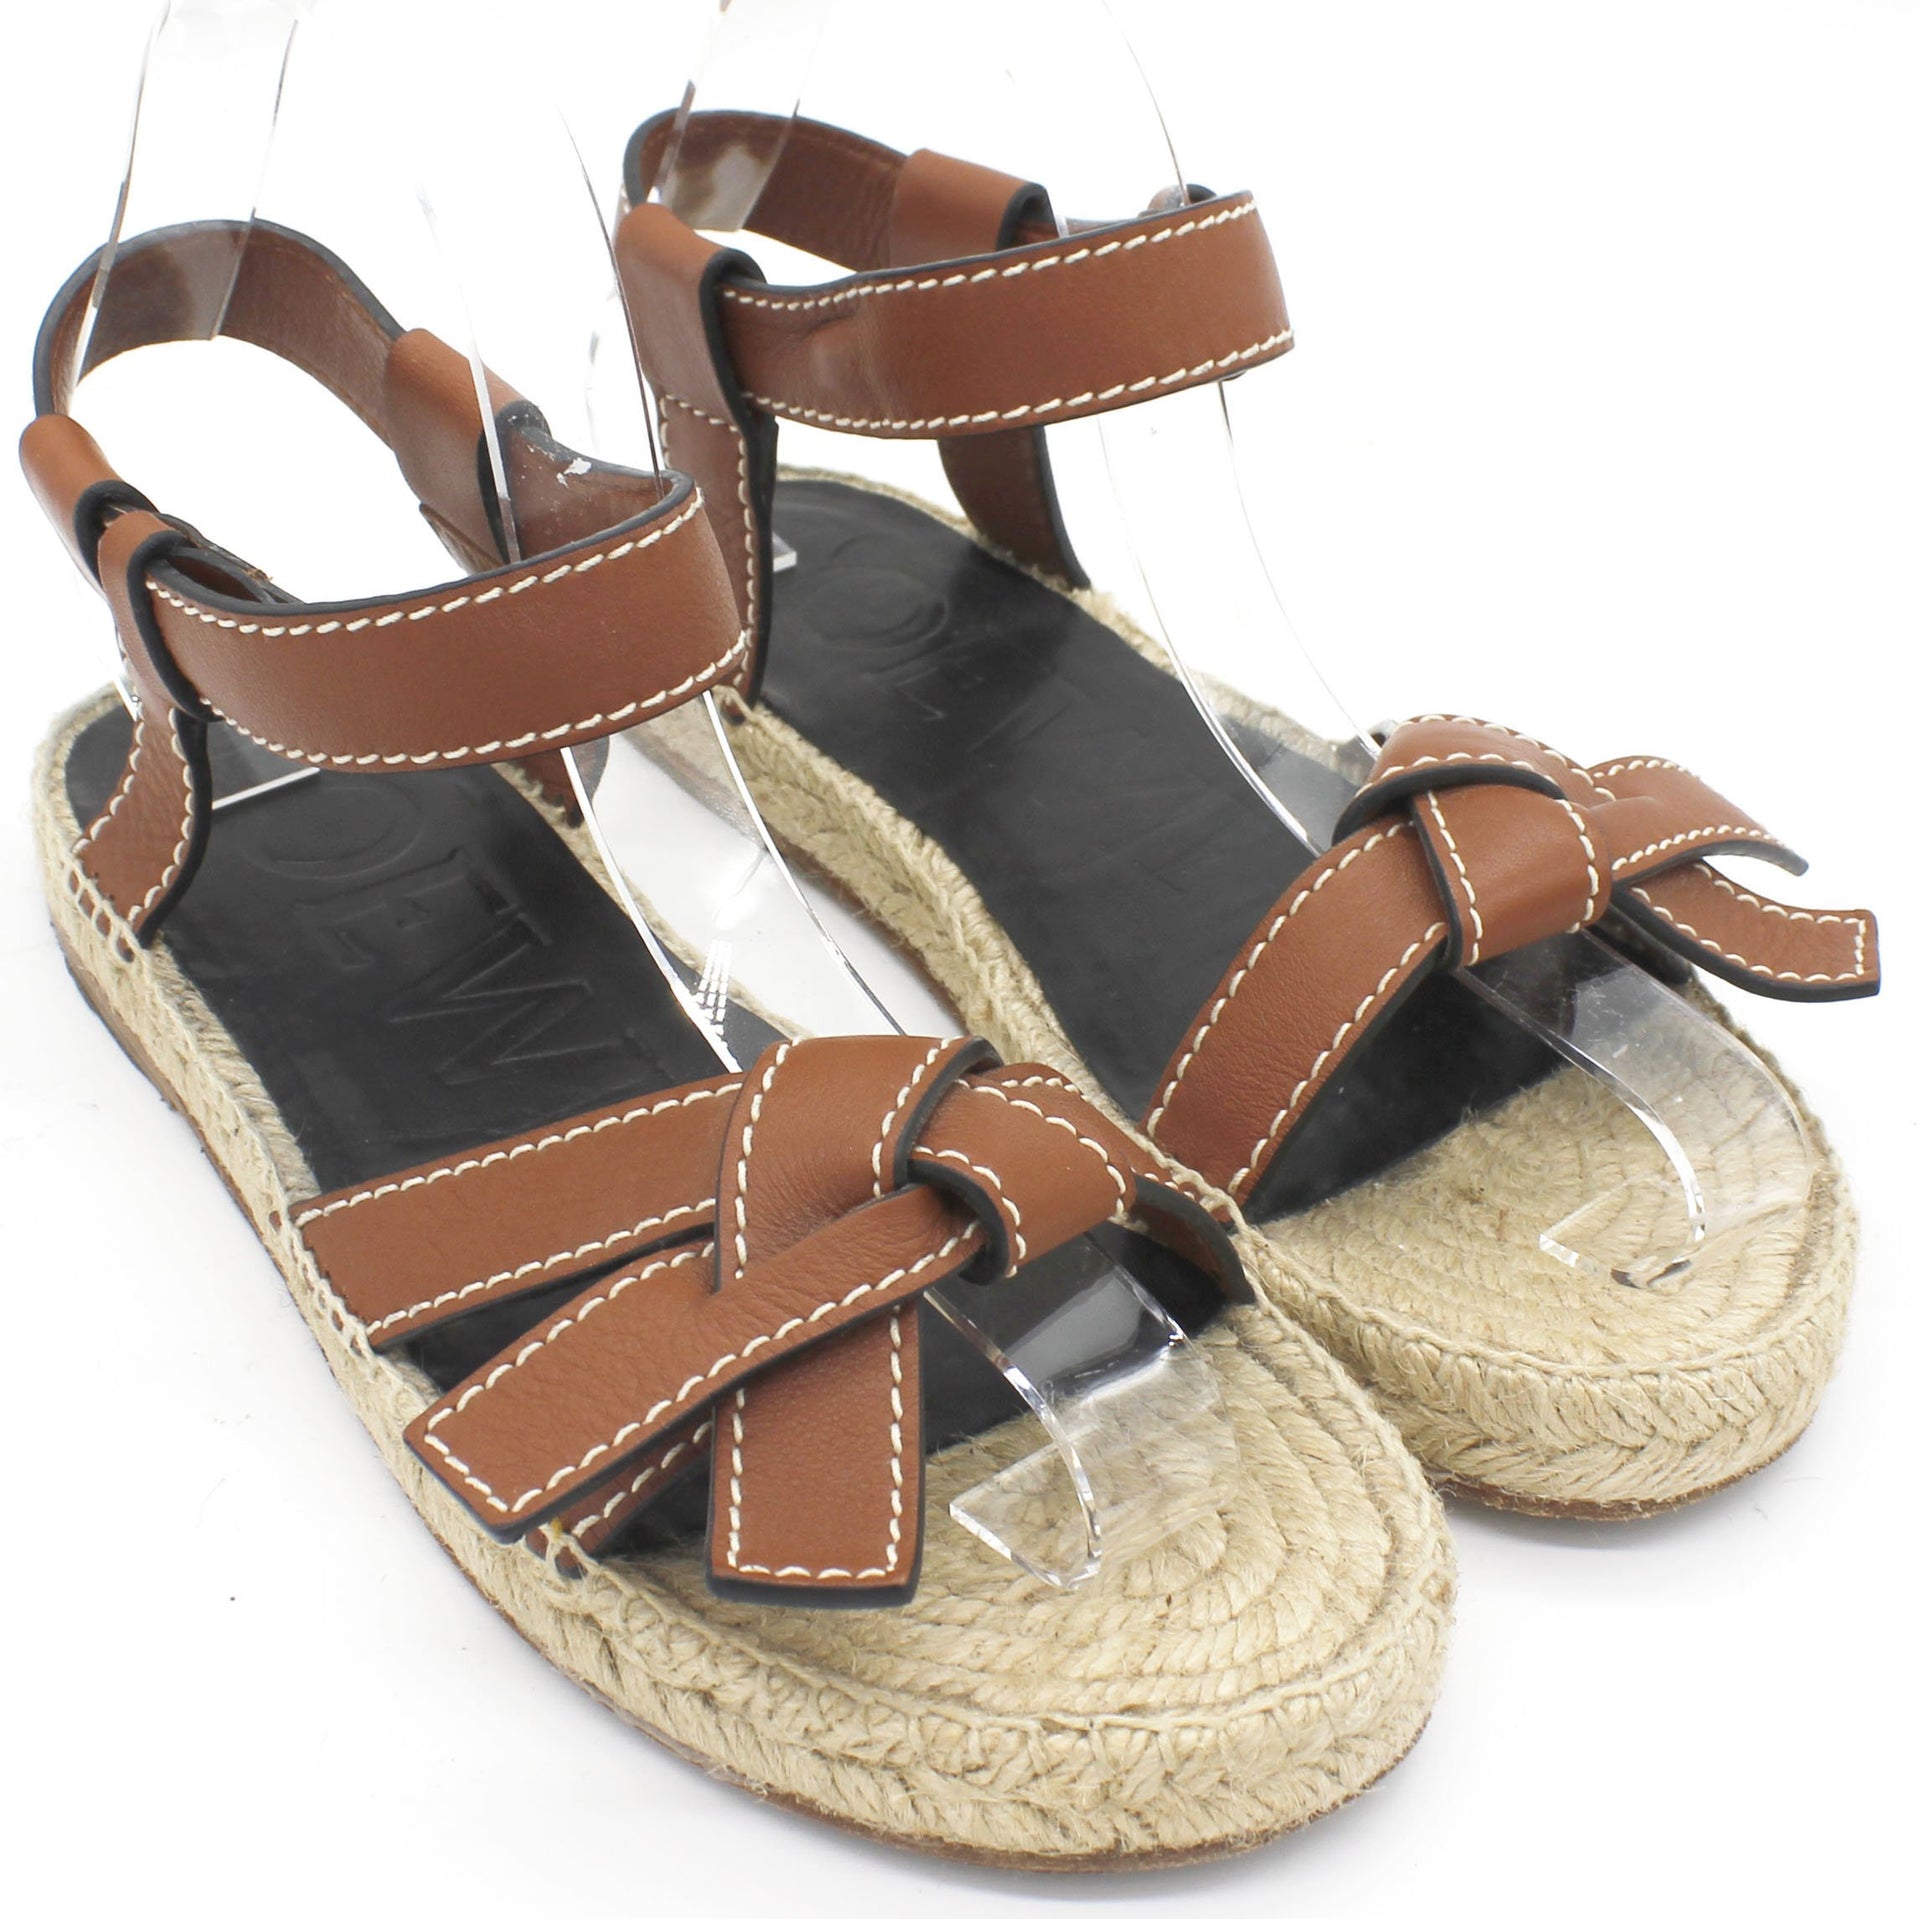 Gate topstitched leather espadrille sandals